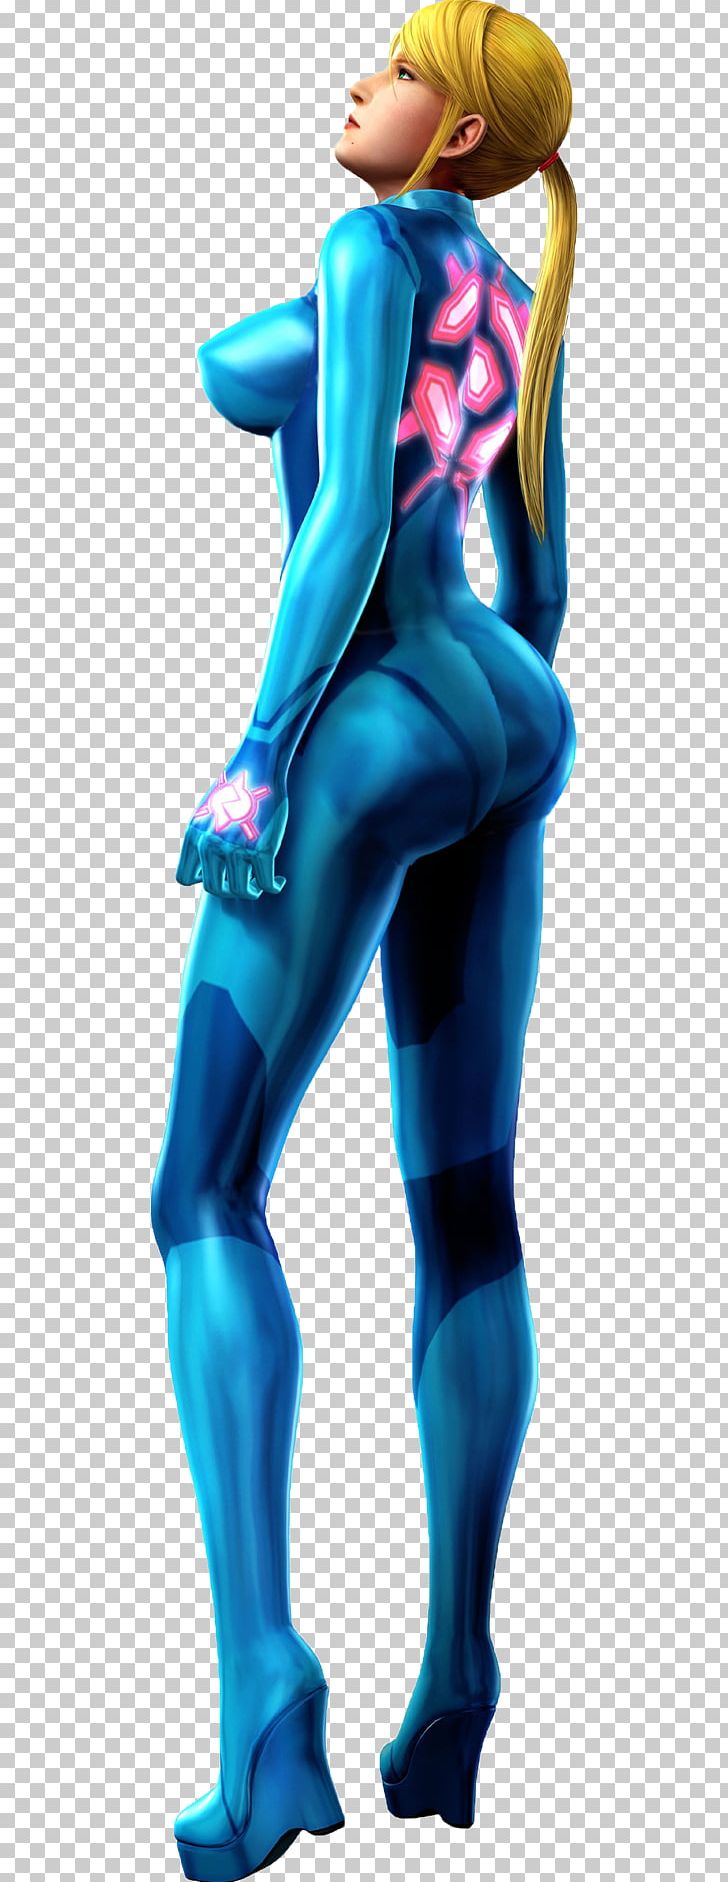 Metroid: Other M Metroid: Zero Mission Super Smash Bros. Brawl Super Smash Bros. For Nintendo 3DS And Wii U PNG, Clipart, Art, Clothing, Cosplay, Costume, Electric Blue Free PNG Download